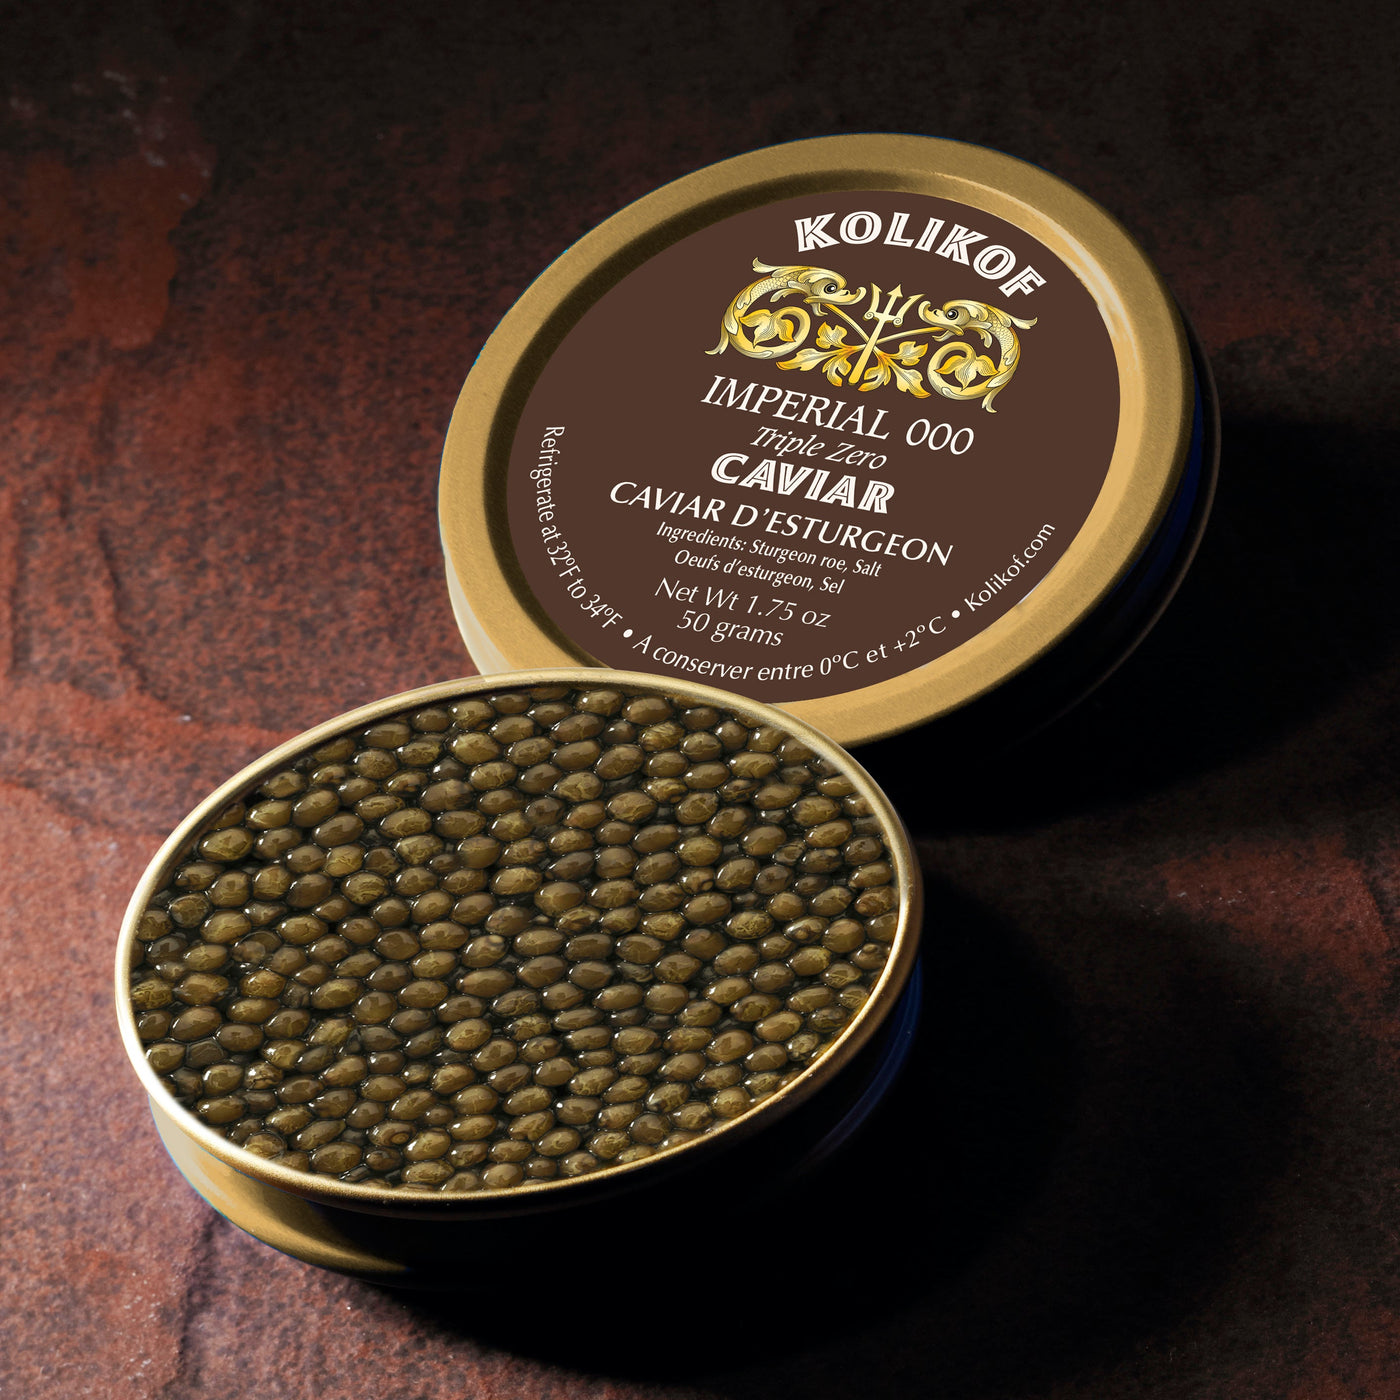 Imperial Triple Zero Caviar. An Extra Large Grain. Best Caviar Gifts.